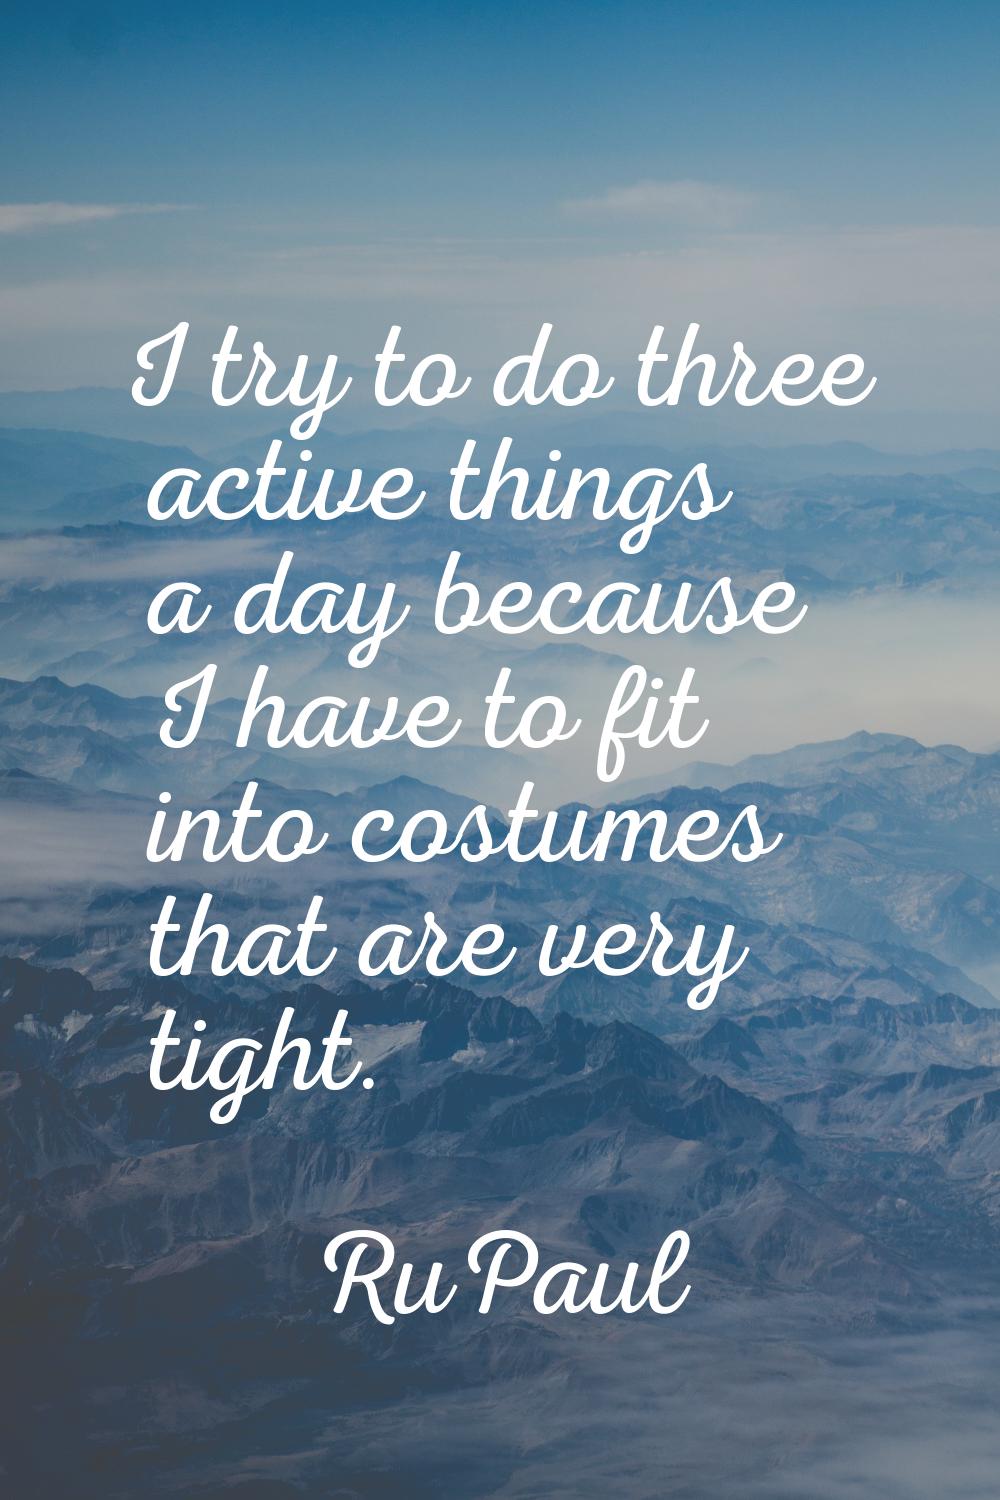 I try to do three active things a day because I have to fit into costumes that are very tight.